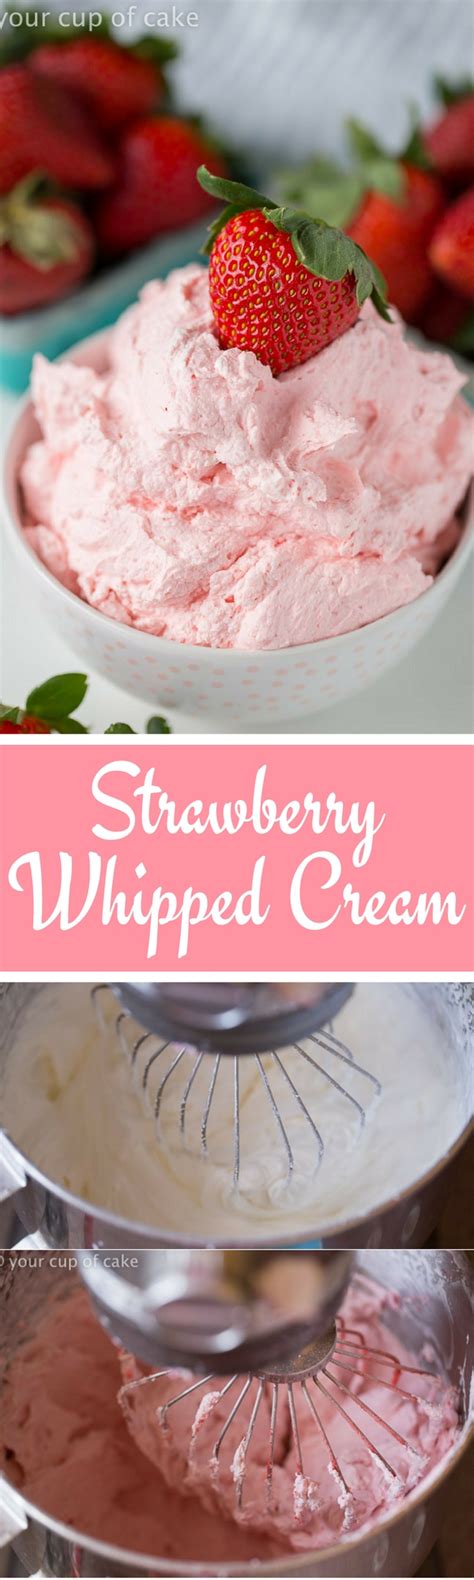 How To Make Strawberry Whipped Cream Your Cup Of Cake